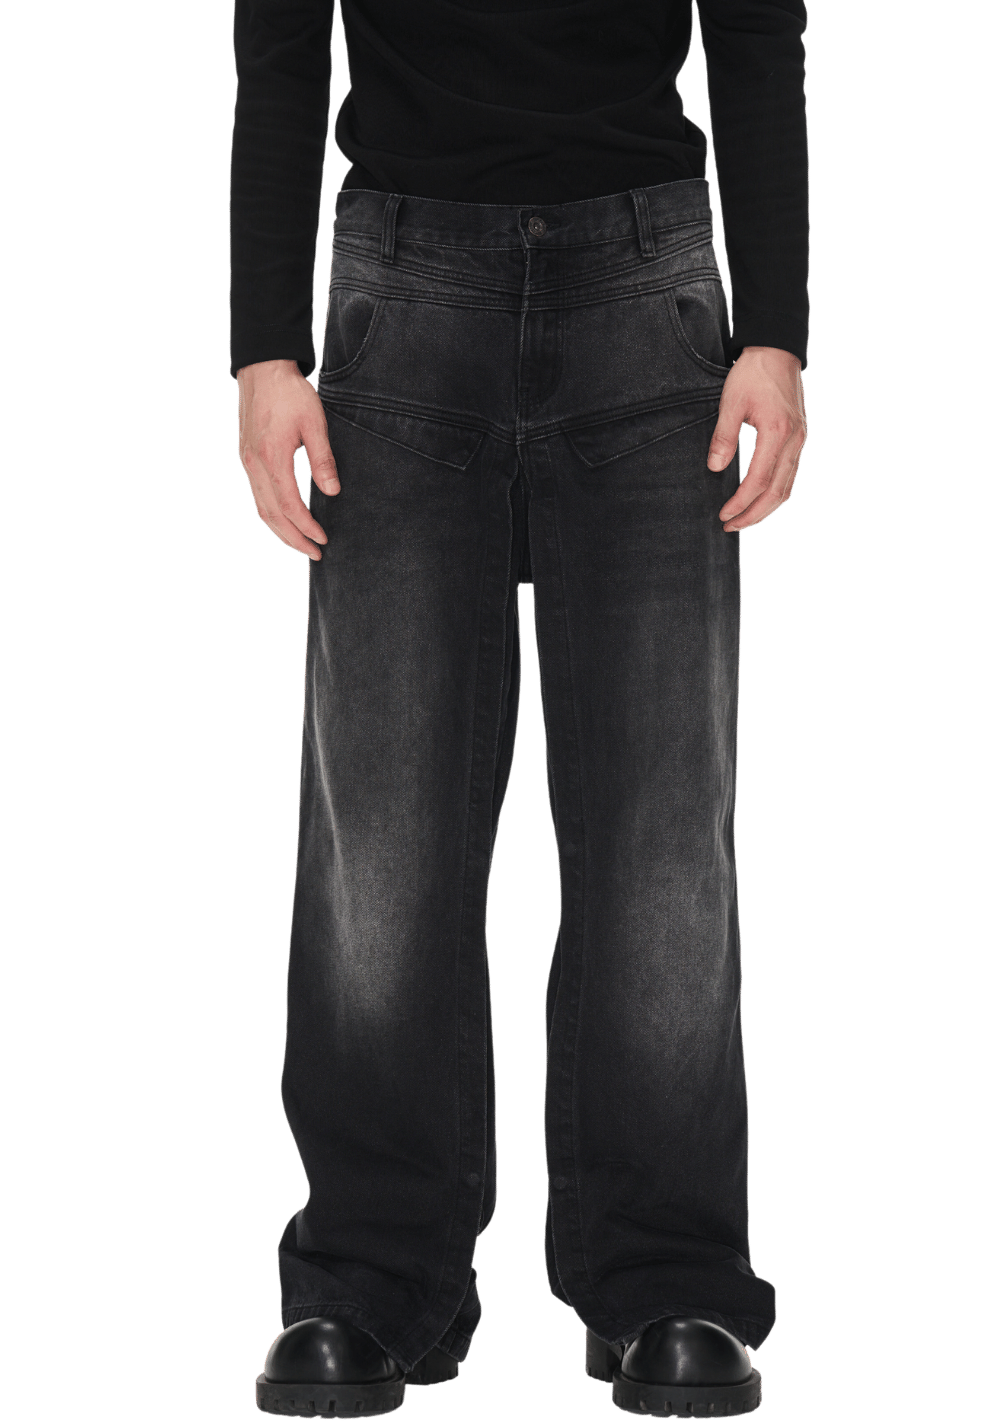 Distressed Stonewashed Jeans - PSYLOS 1, Distressed Stonewashed Jeans, Pants, BLIND NO PLAN, PSYLOS 1